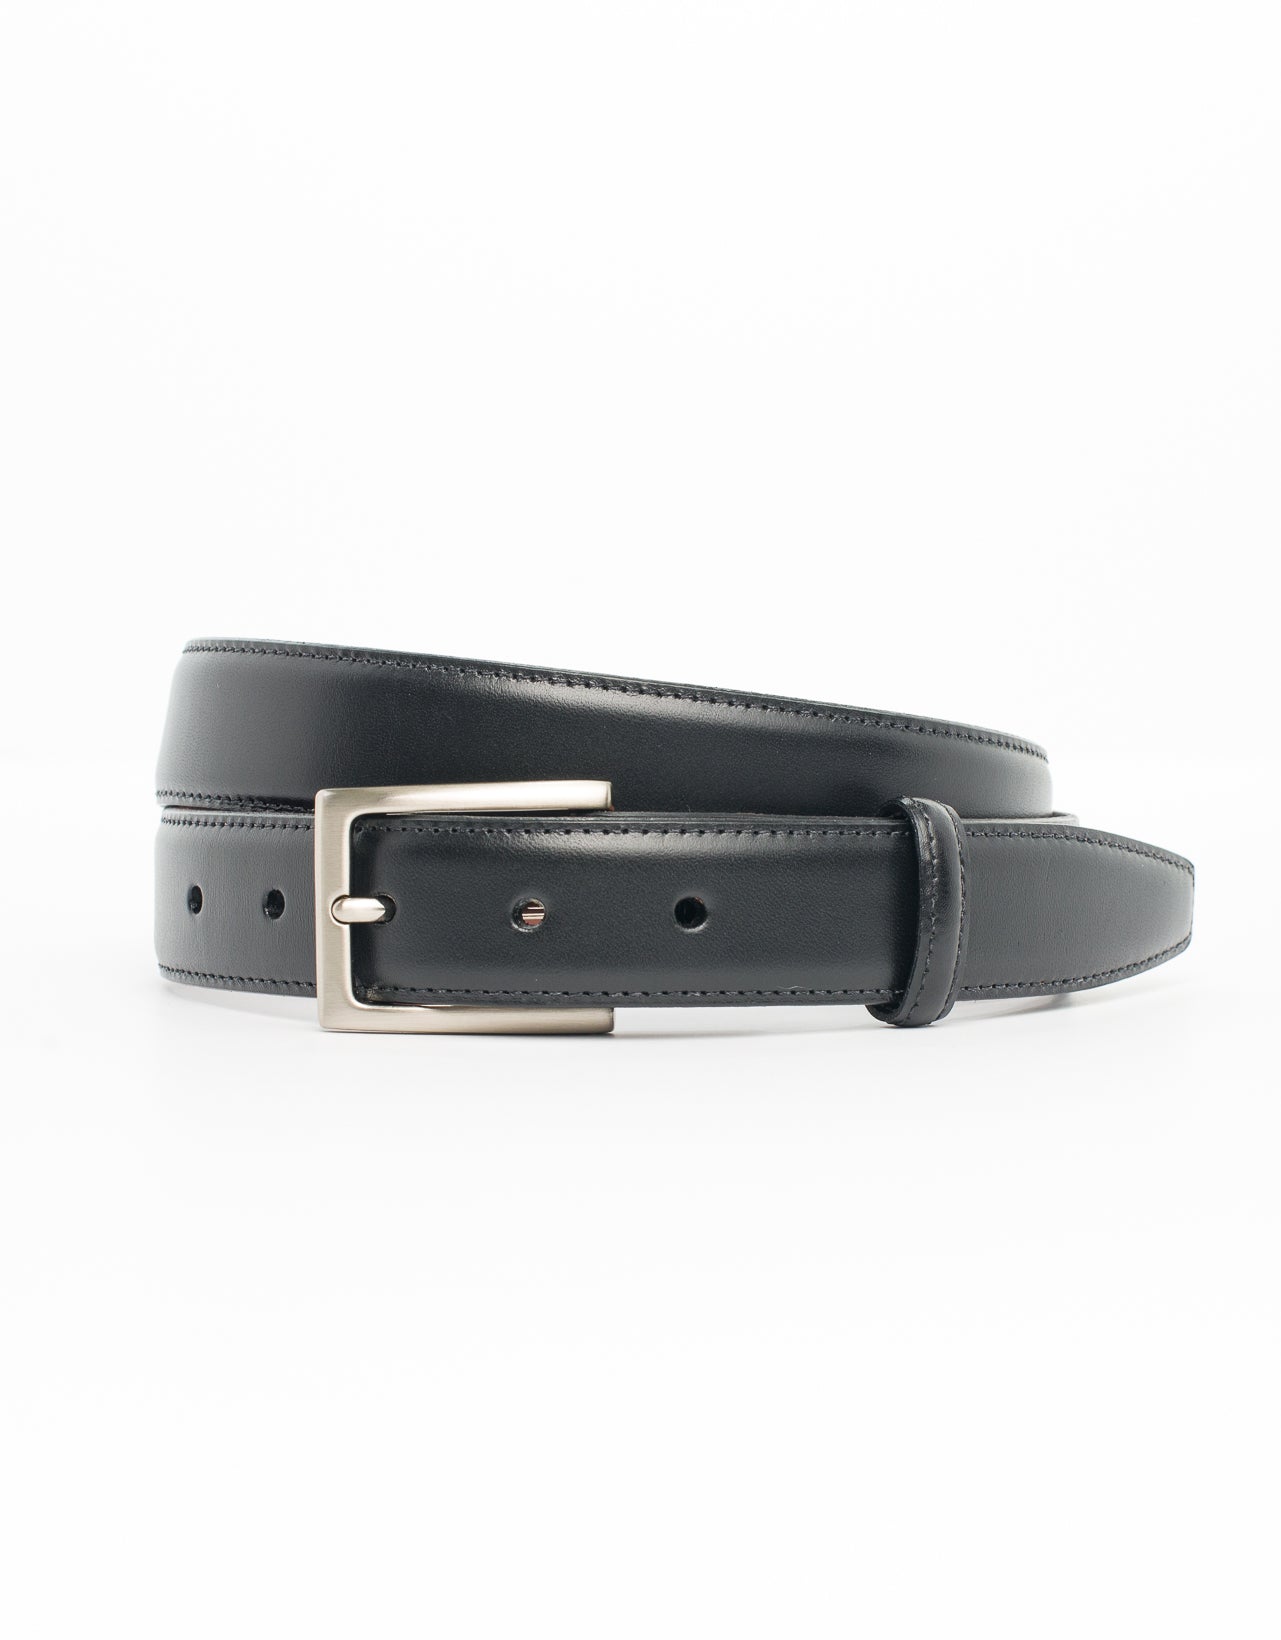 BLACK WITH SILVER ITALIAN LEATHER BELT